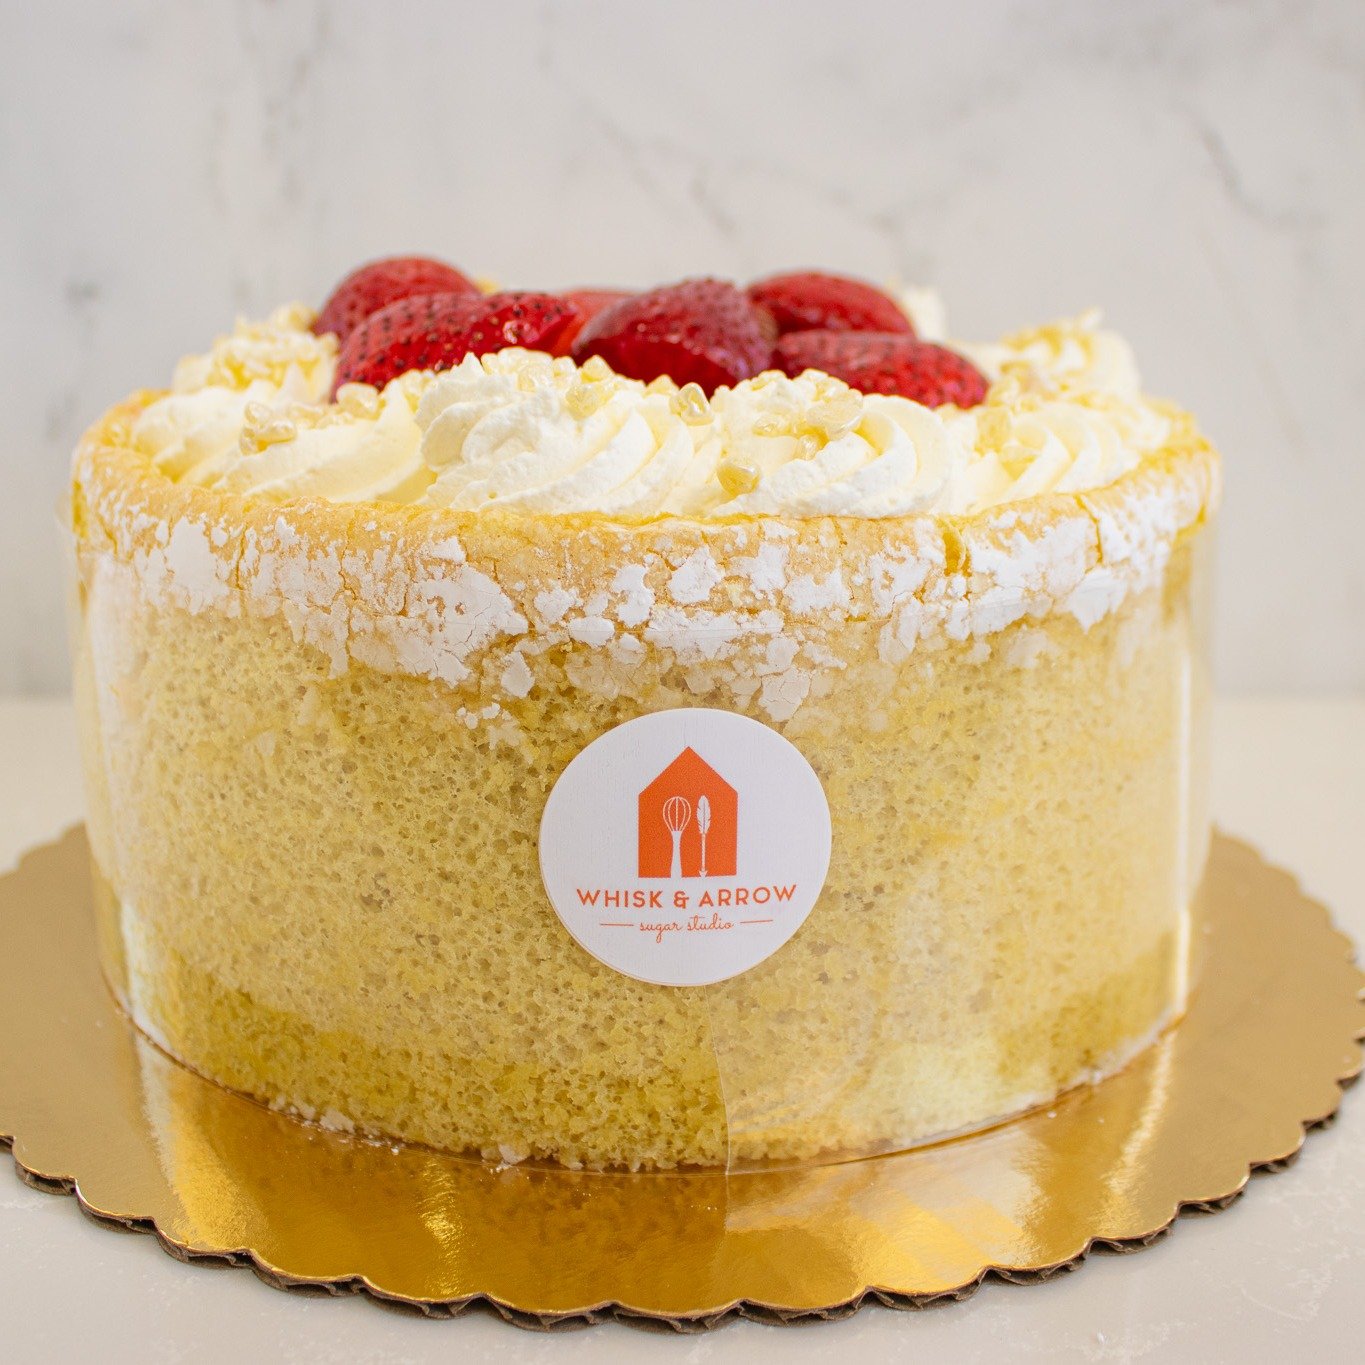 Strawberries and sunshine go hand in hand. We have an extra of our Cake of the Month, a Charlotte Russe, available today!

The Charlotte Russe is strawberry bavarois wrapped in lady finger sponge and garnished with chantilly cream and fresh strawberr